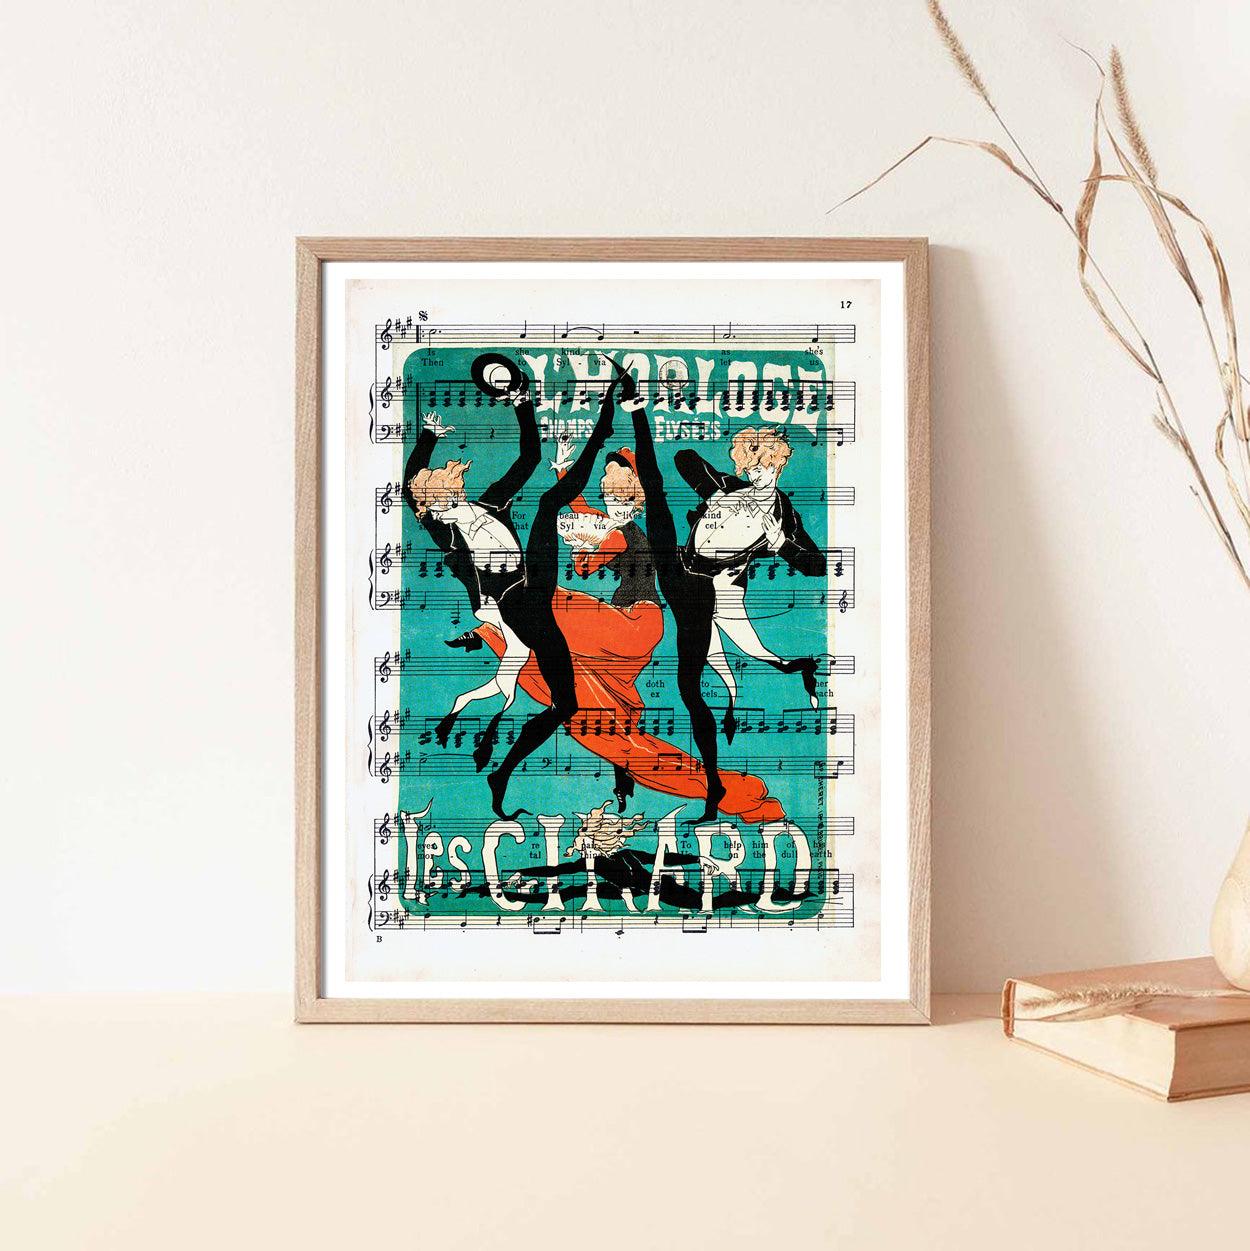 Give your home decor a touch of elegance through our exquisite Les Girard reproduction poster. The artwork is a collage with the poster Dancers in art design by Jules Chéret (French graphic designer, 1836-1932). Year of created 1879.